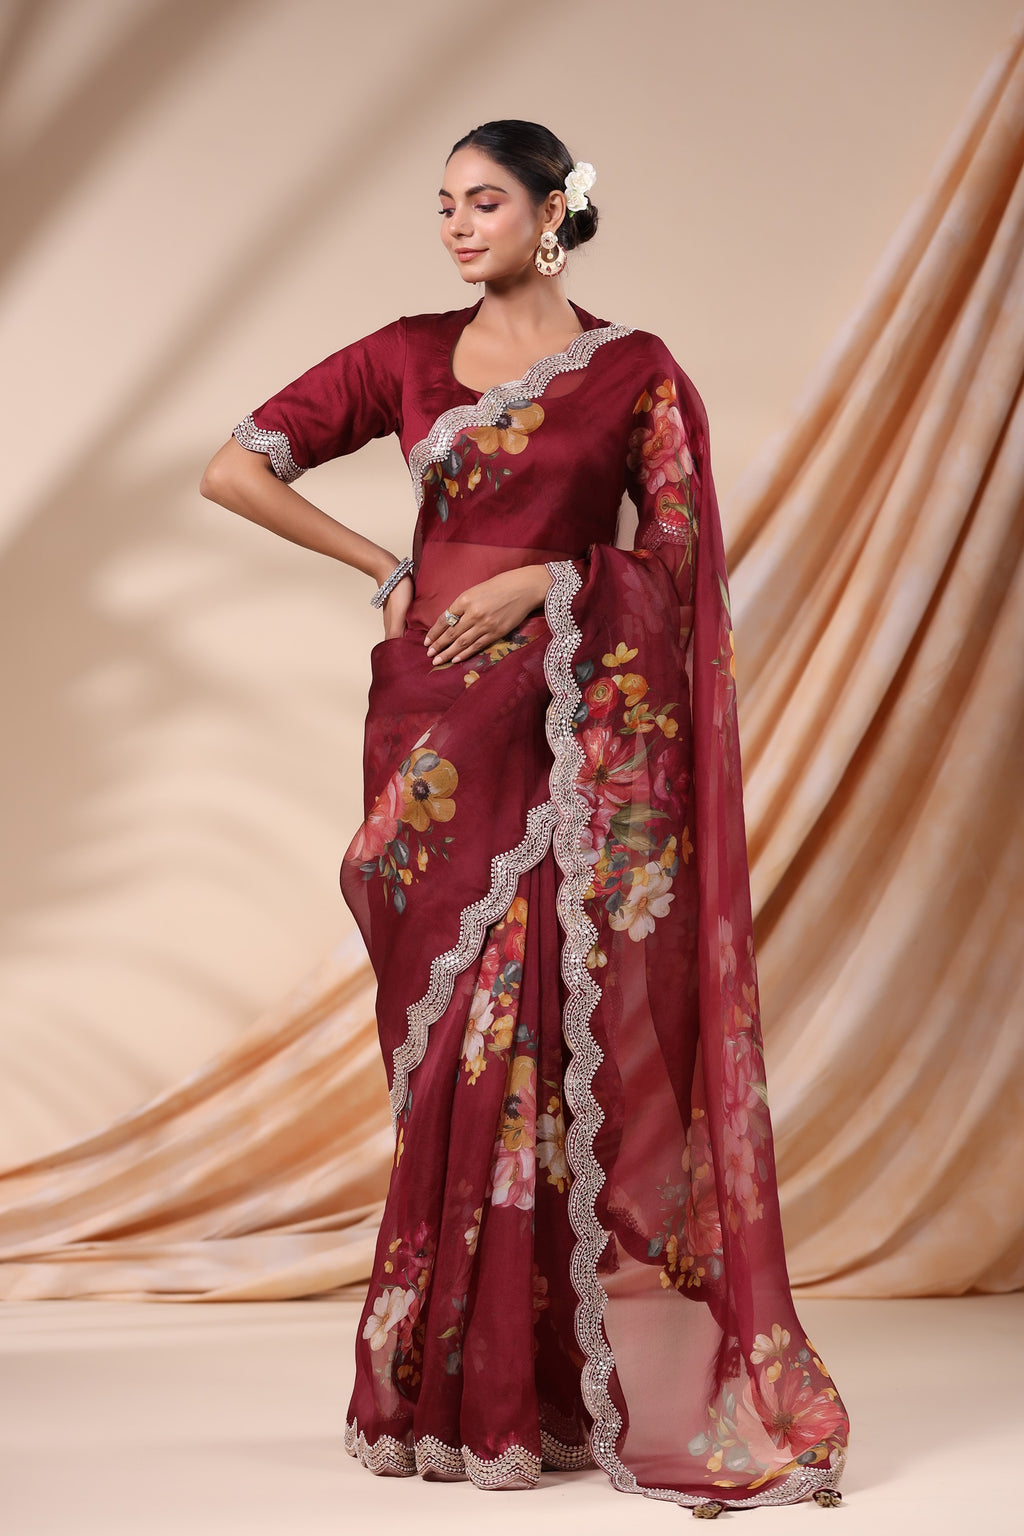 Buy maroon floral organza silk saree online in USA with embroidered scalloped border. Look classy at weddings and special occasions in exquisite designer sarees, embroidered sarees, party sarees, handwoven saris, pure silk sarees, Banarasi sarees, Kanjivaram sarees from Pure Elegance Indian saree store in USA.-full view